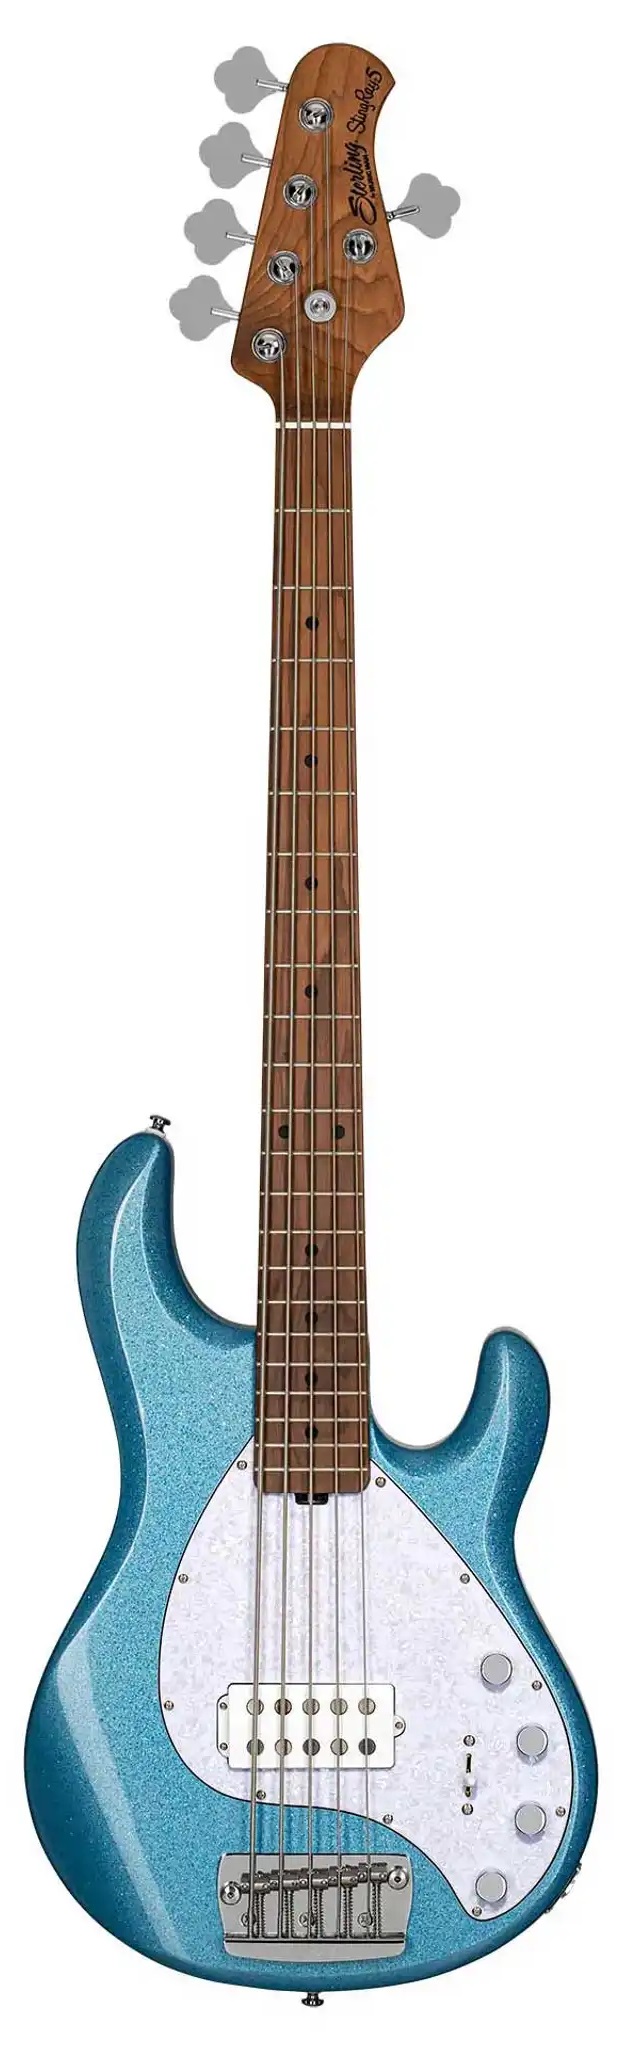 Sterling by Music Man RAY35 Blue Sparkle